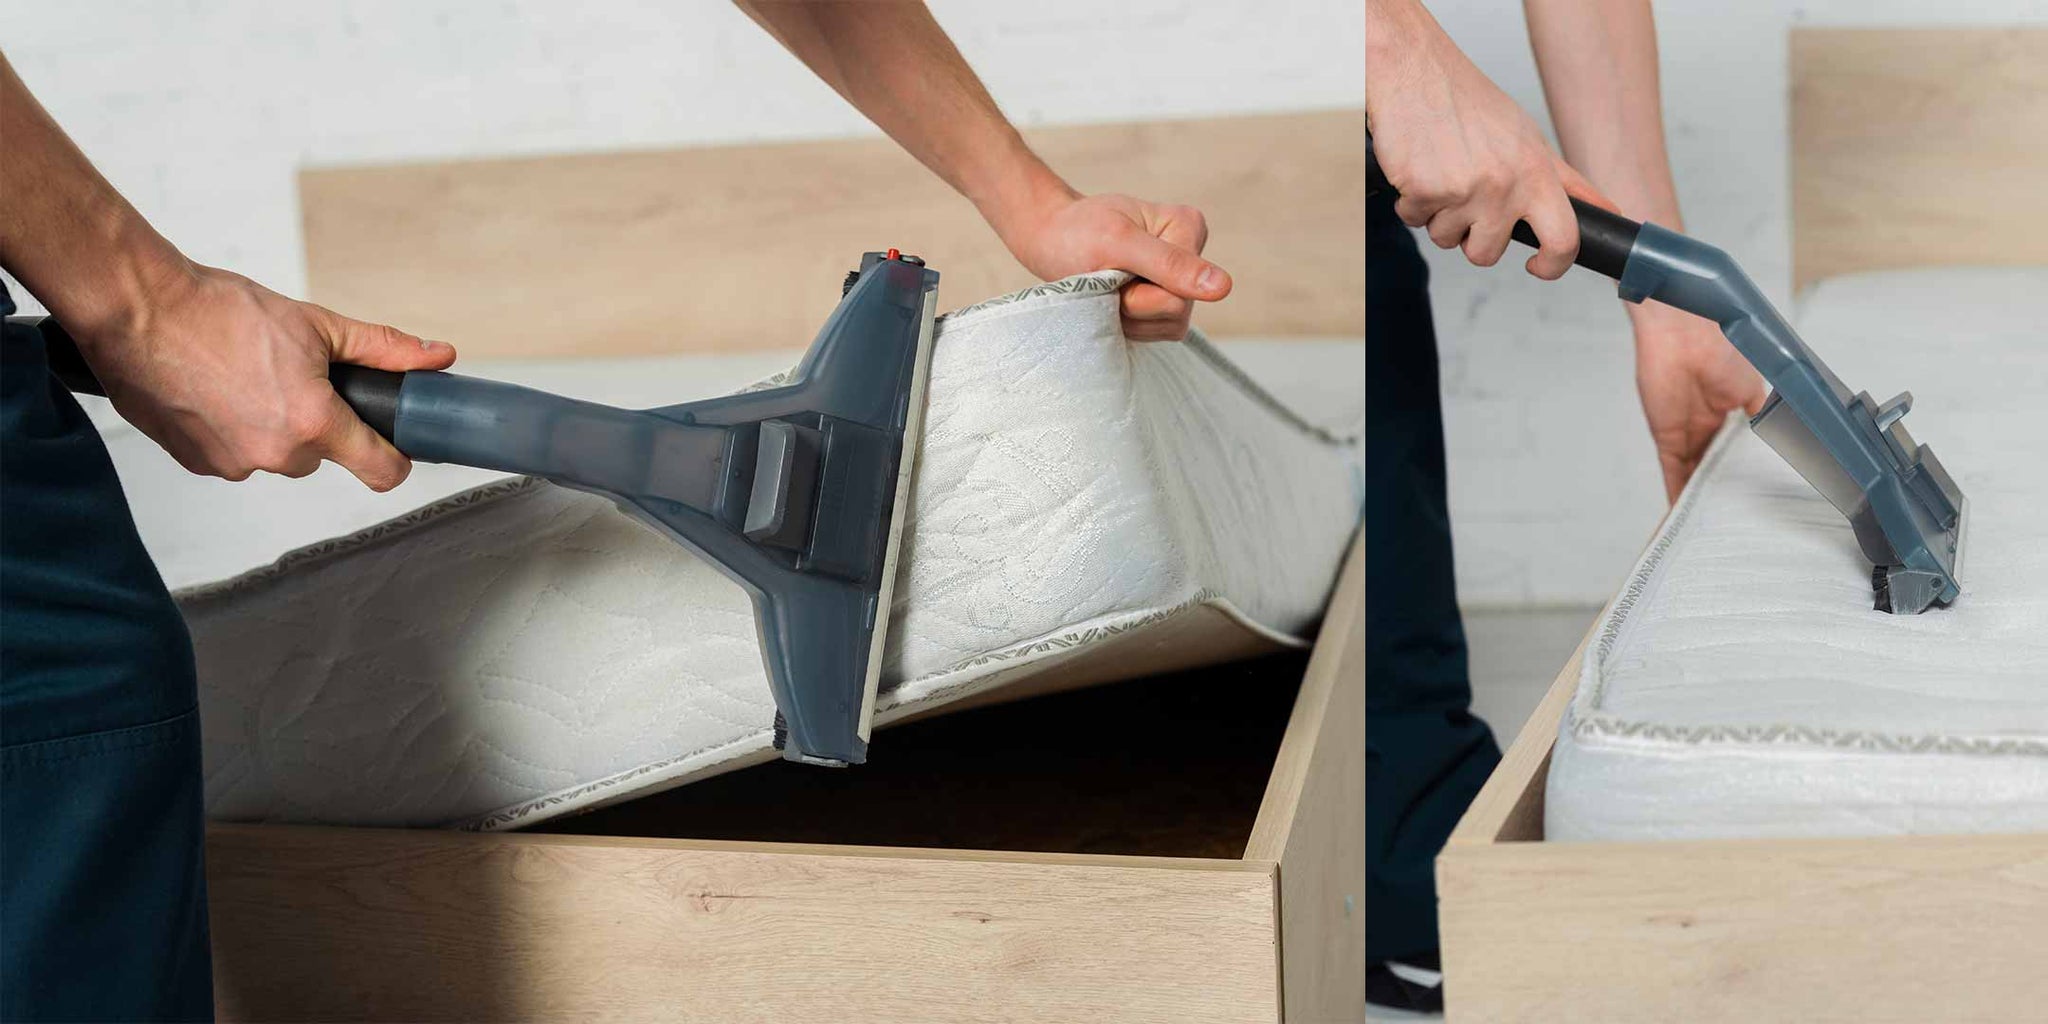 Using Vacuum to Eliminate Dirt and Clean a Mattress